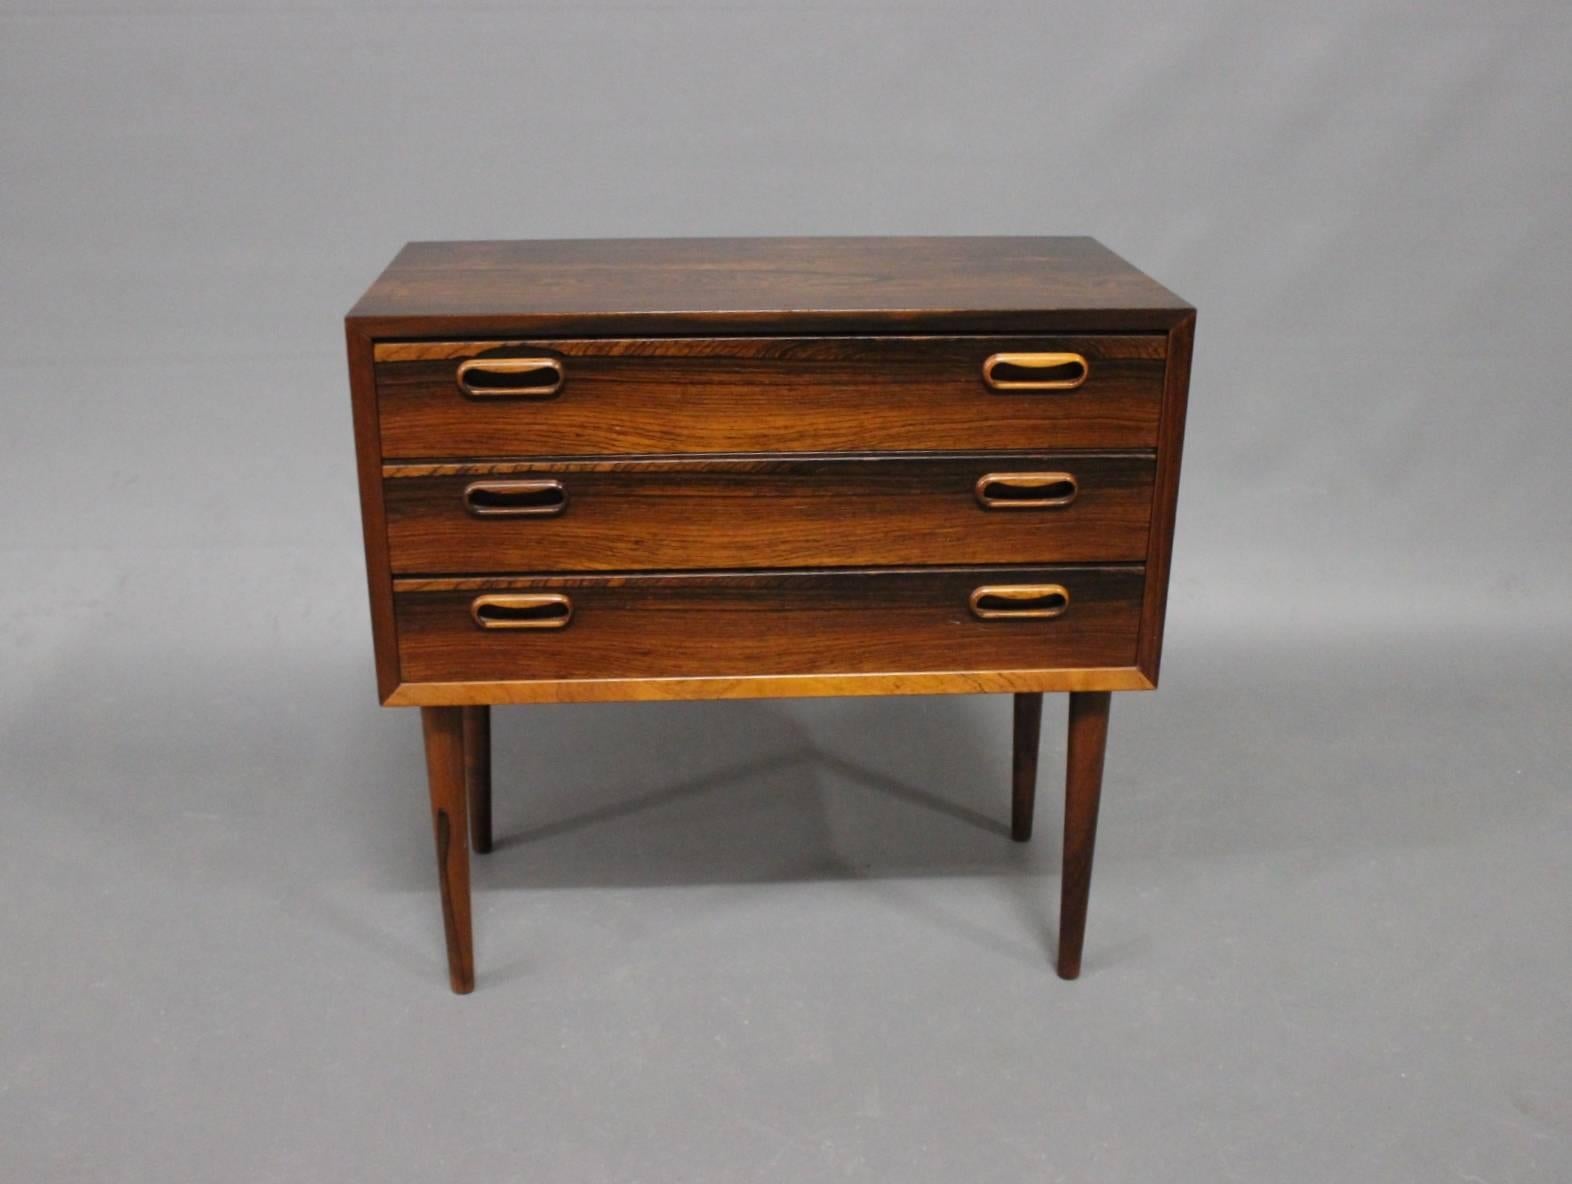 Small chest of drawers in rosewood of Danish design from the 1960s. The chest is in excellent vintage condition.